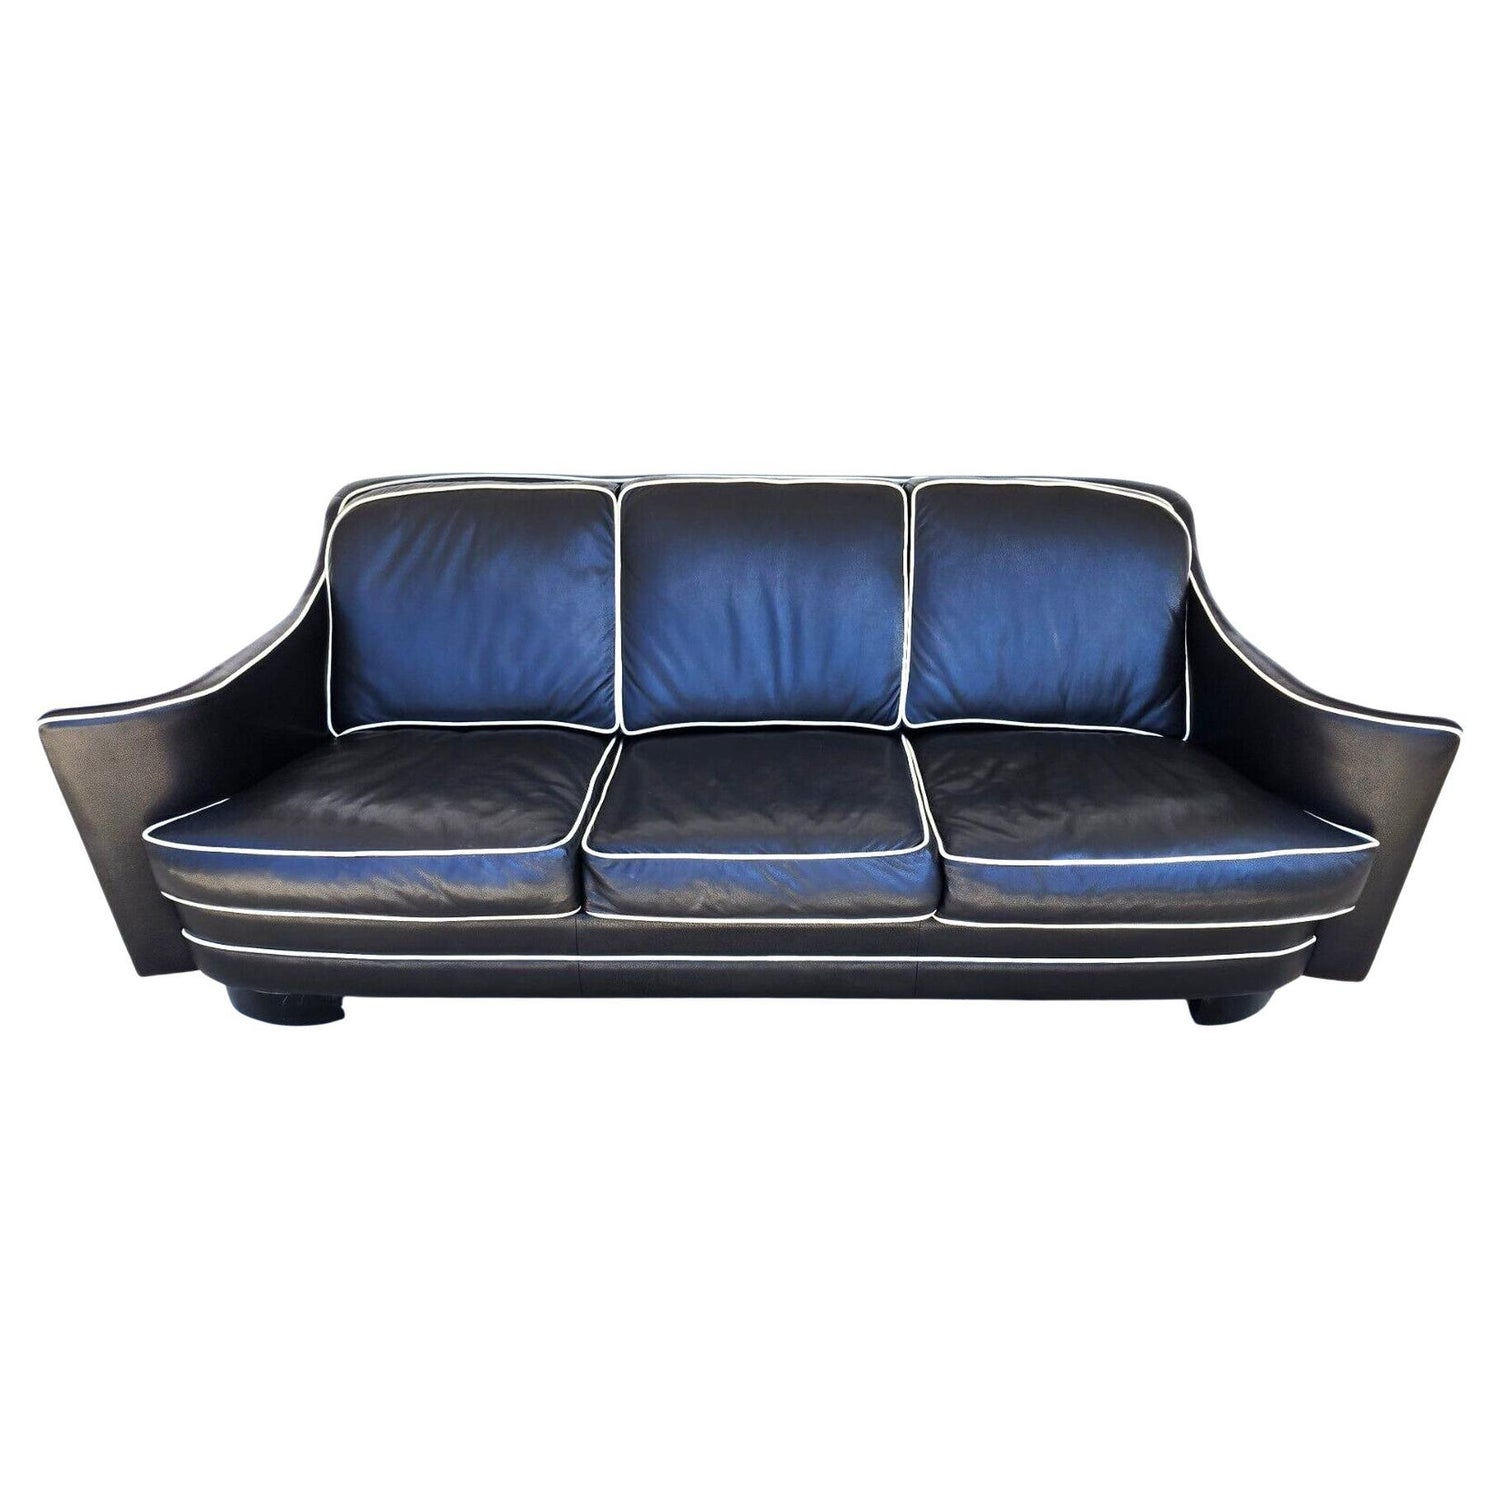 Bentley Churchill Leather Sofa For